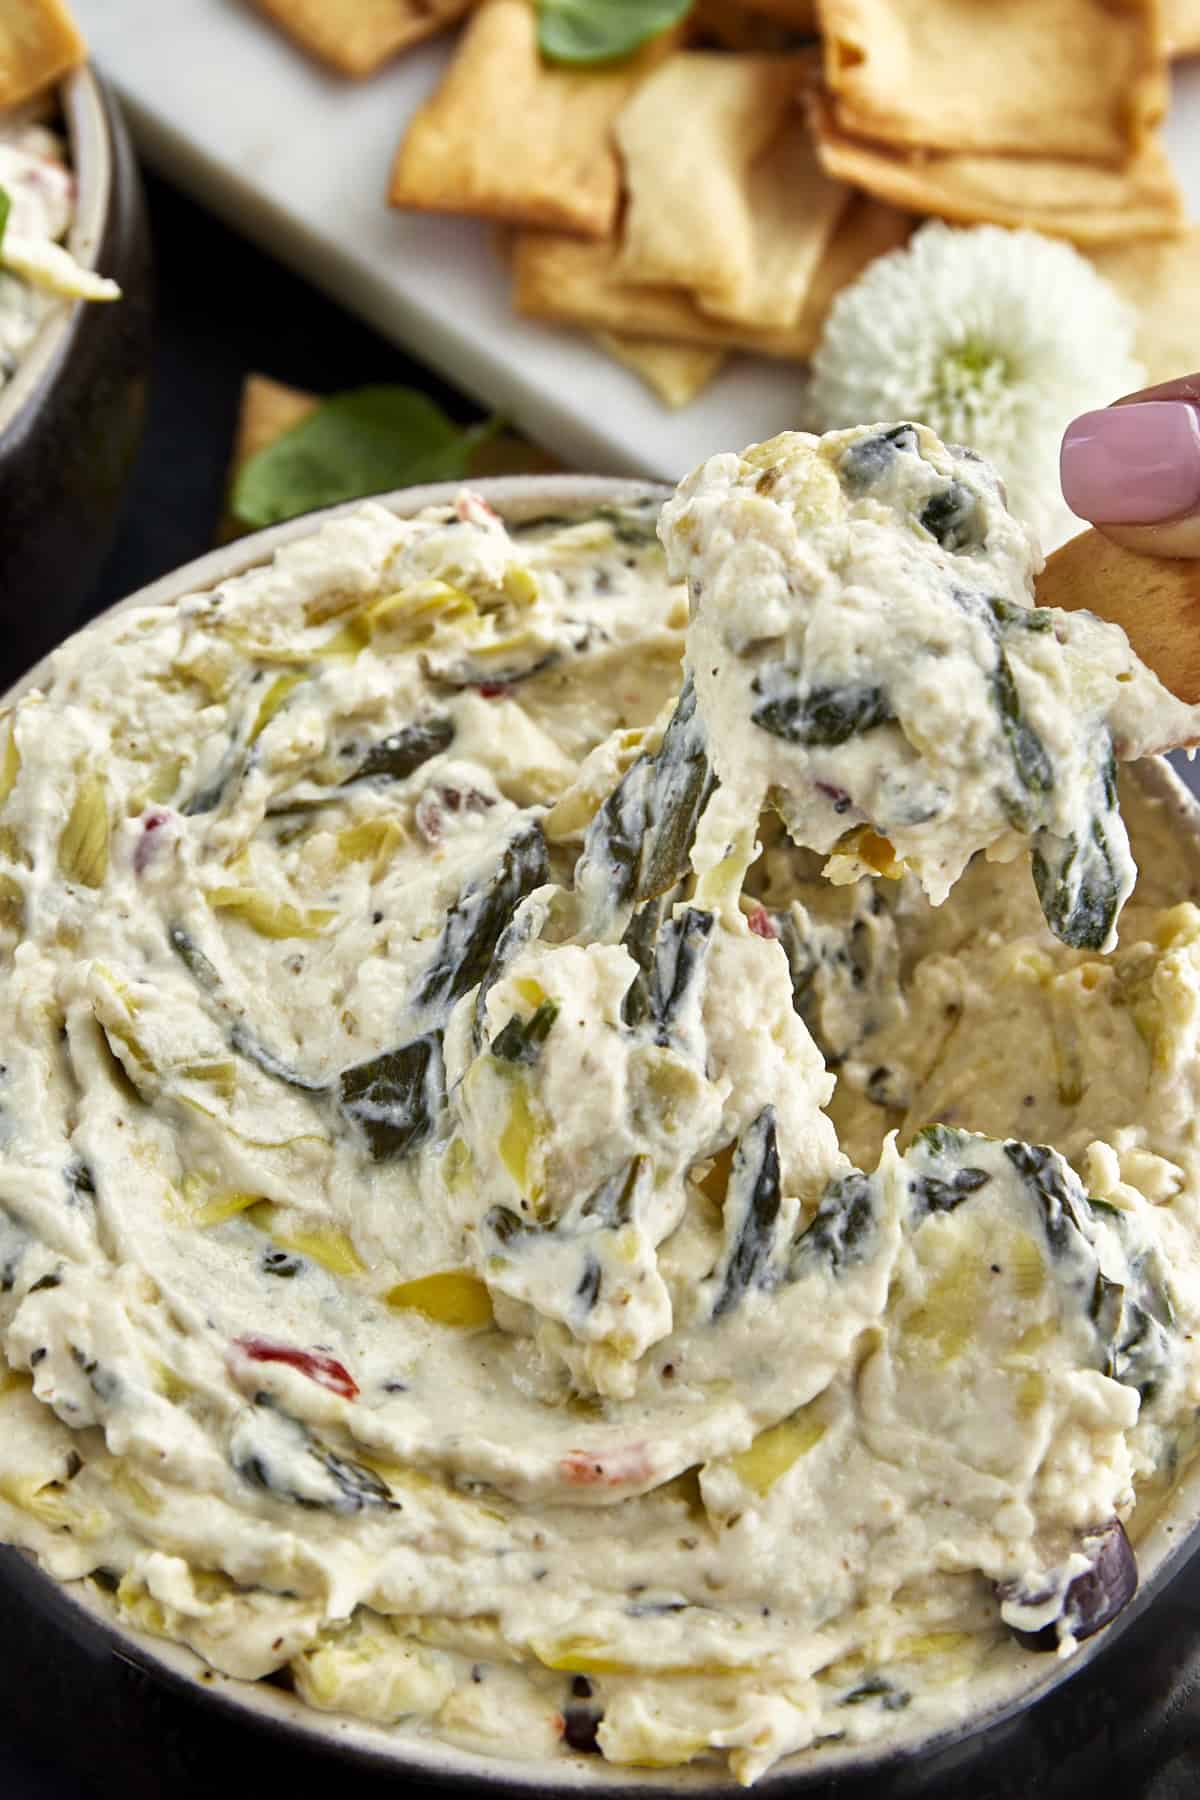 A chip scooping up spinach and artichoke dip from a bowl.